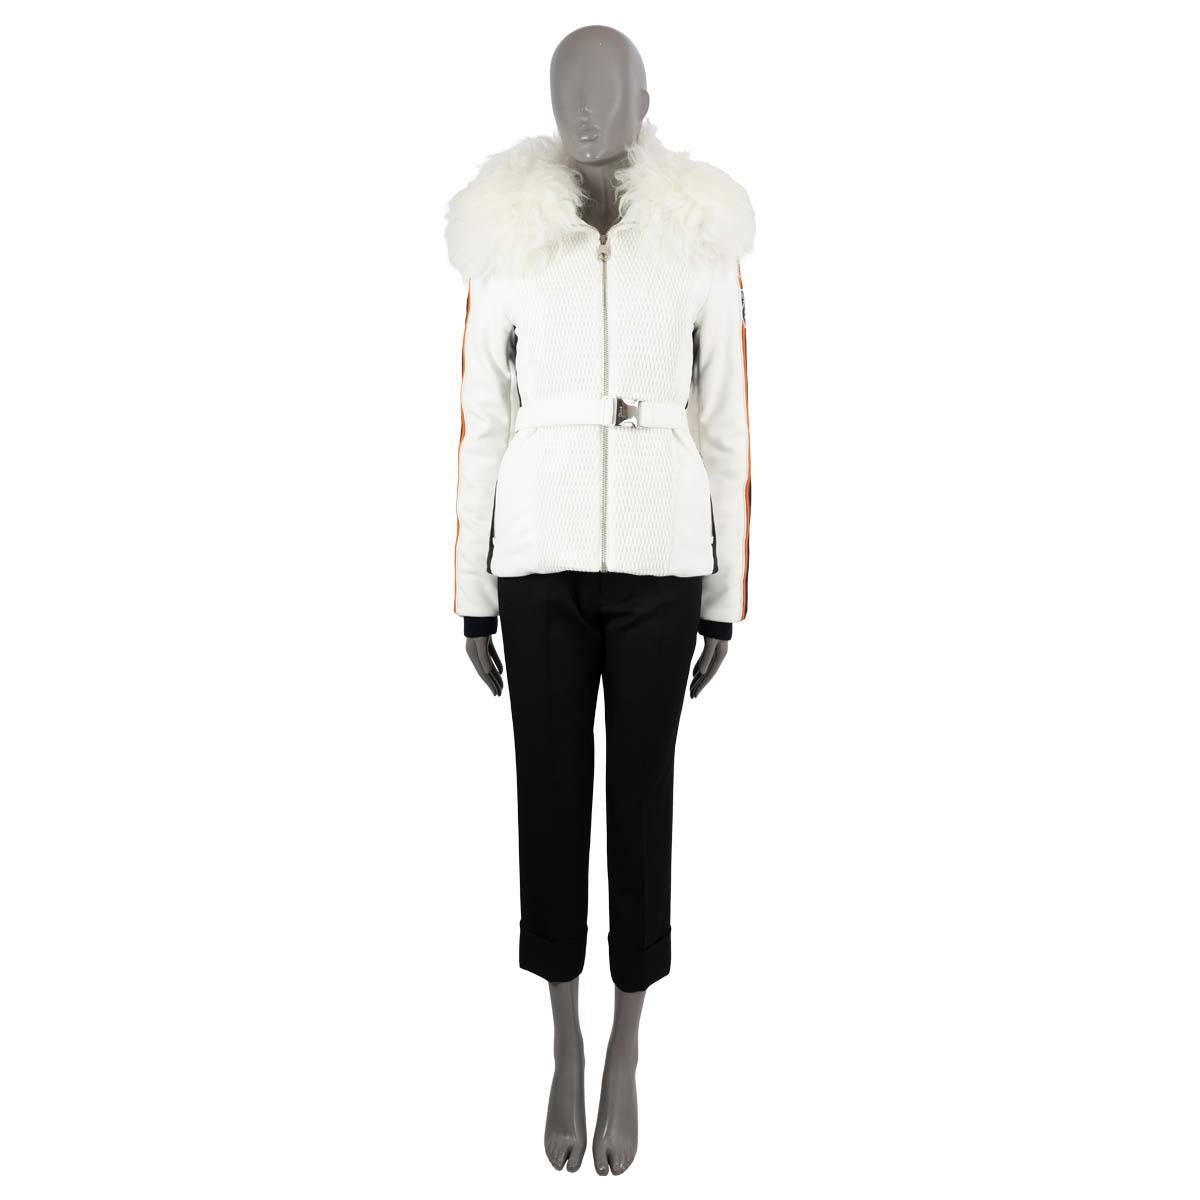 100% authentic Chloé x Fusalp belted and fitted ski jacket in white technical outerwear material made of polyester (76%), polyurethane (4%). Secondary material: Polyamide (45%), polyester (42%) and elastane (13%). Lined in salmon and white polyester